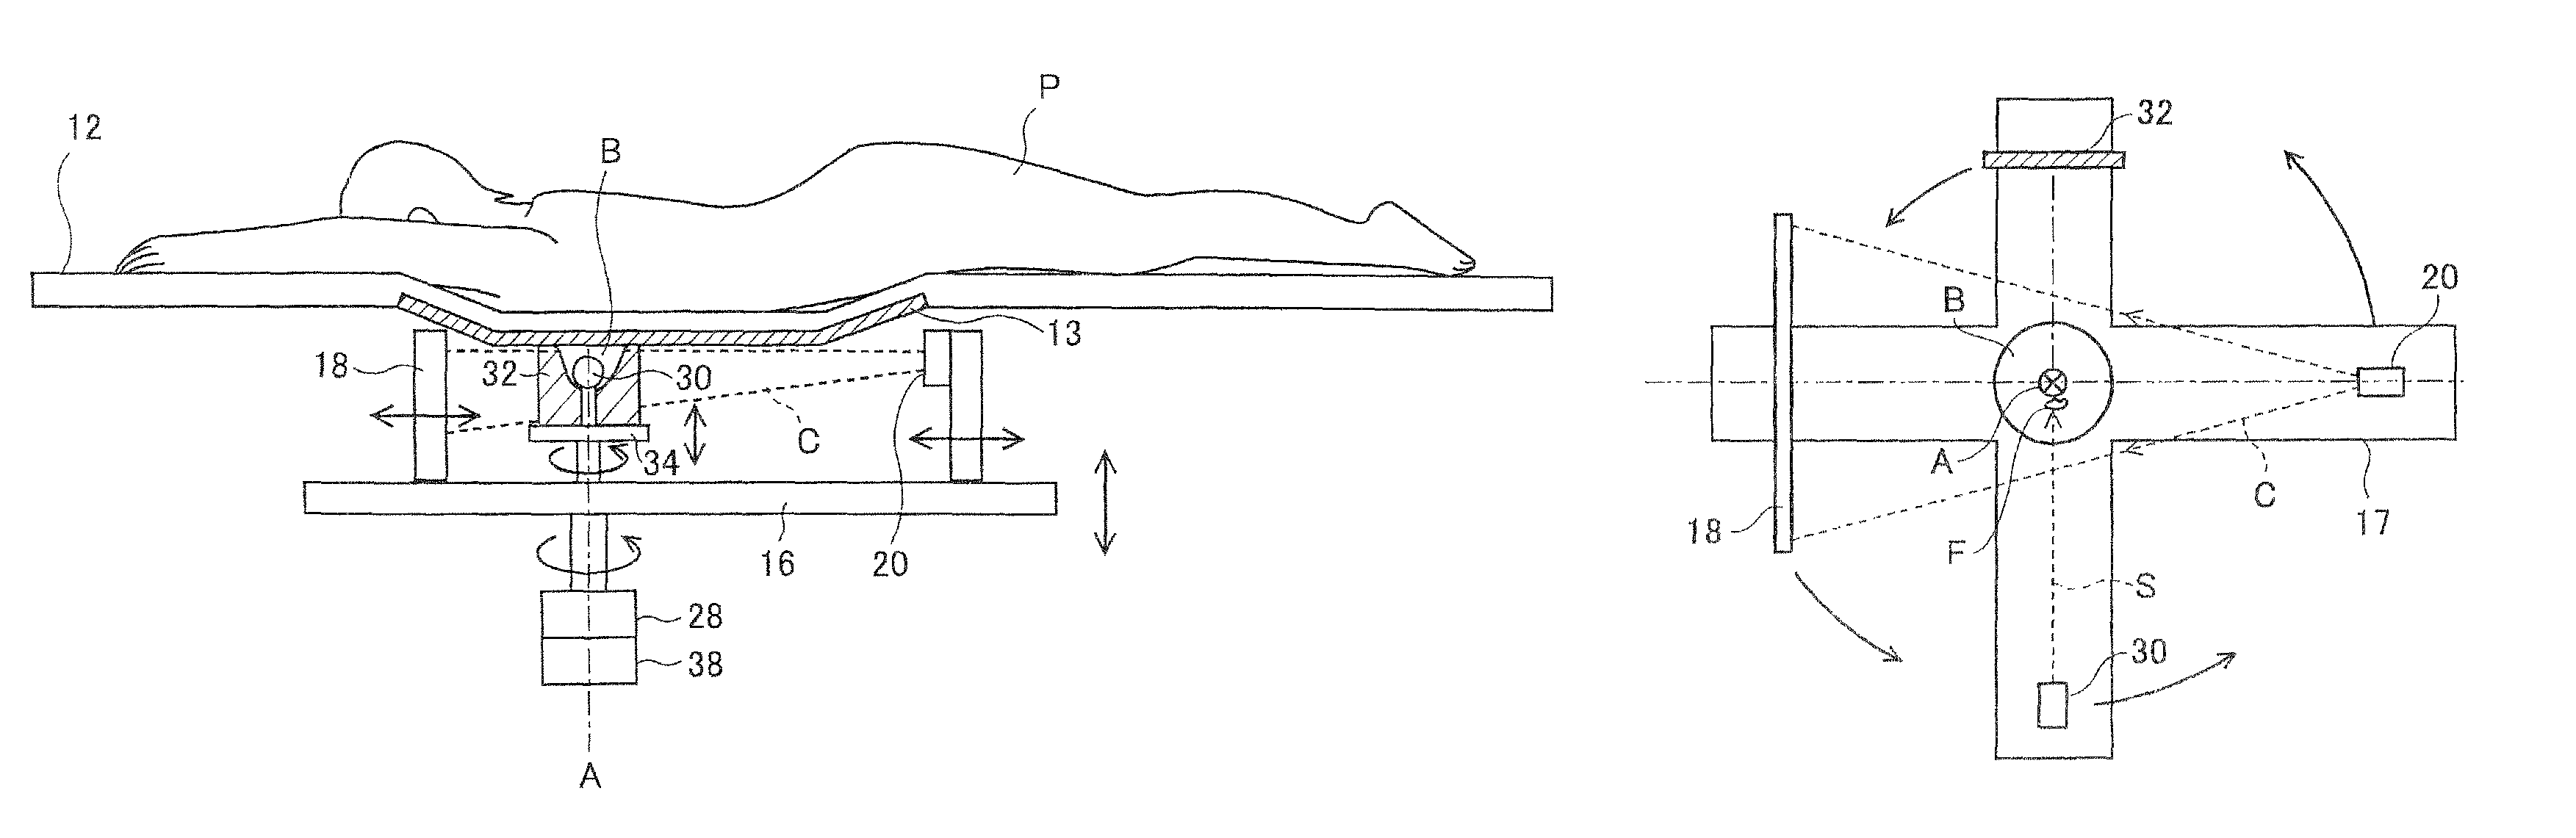 Radiation imaging and therapy apparatus for breast